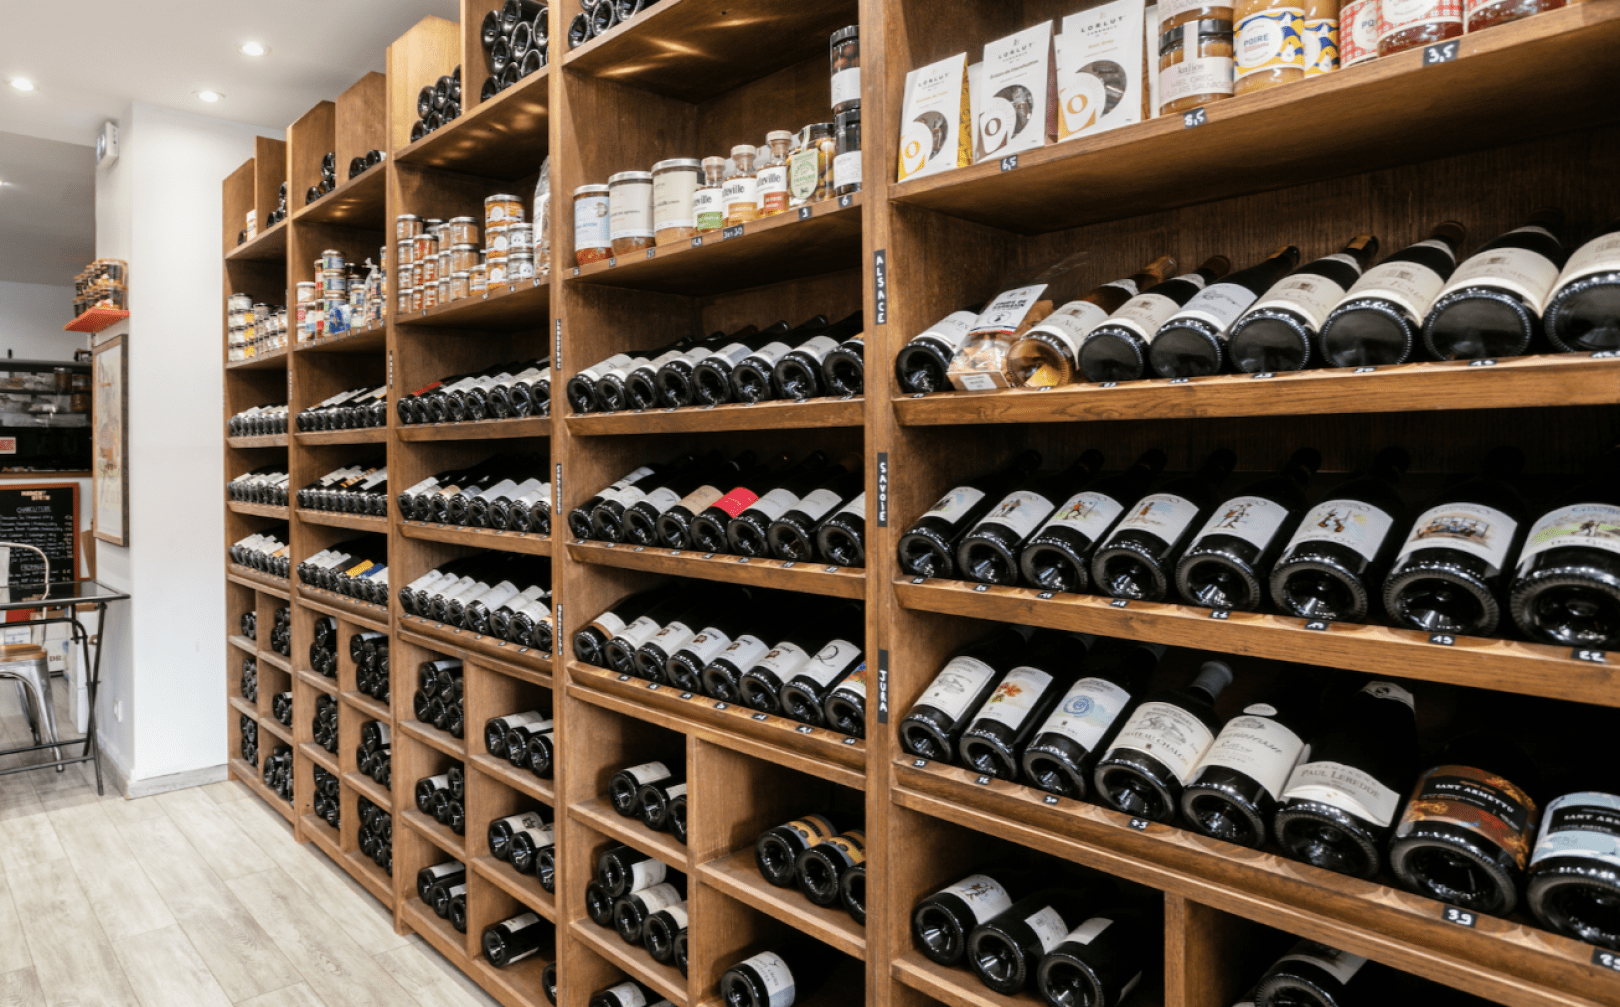 Focus on one of our neighbors: the Moment Divin wine cellar